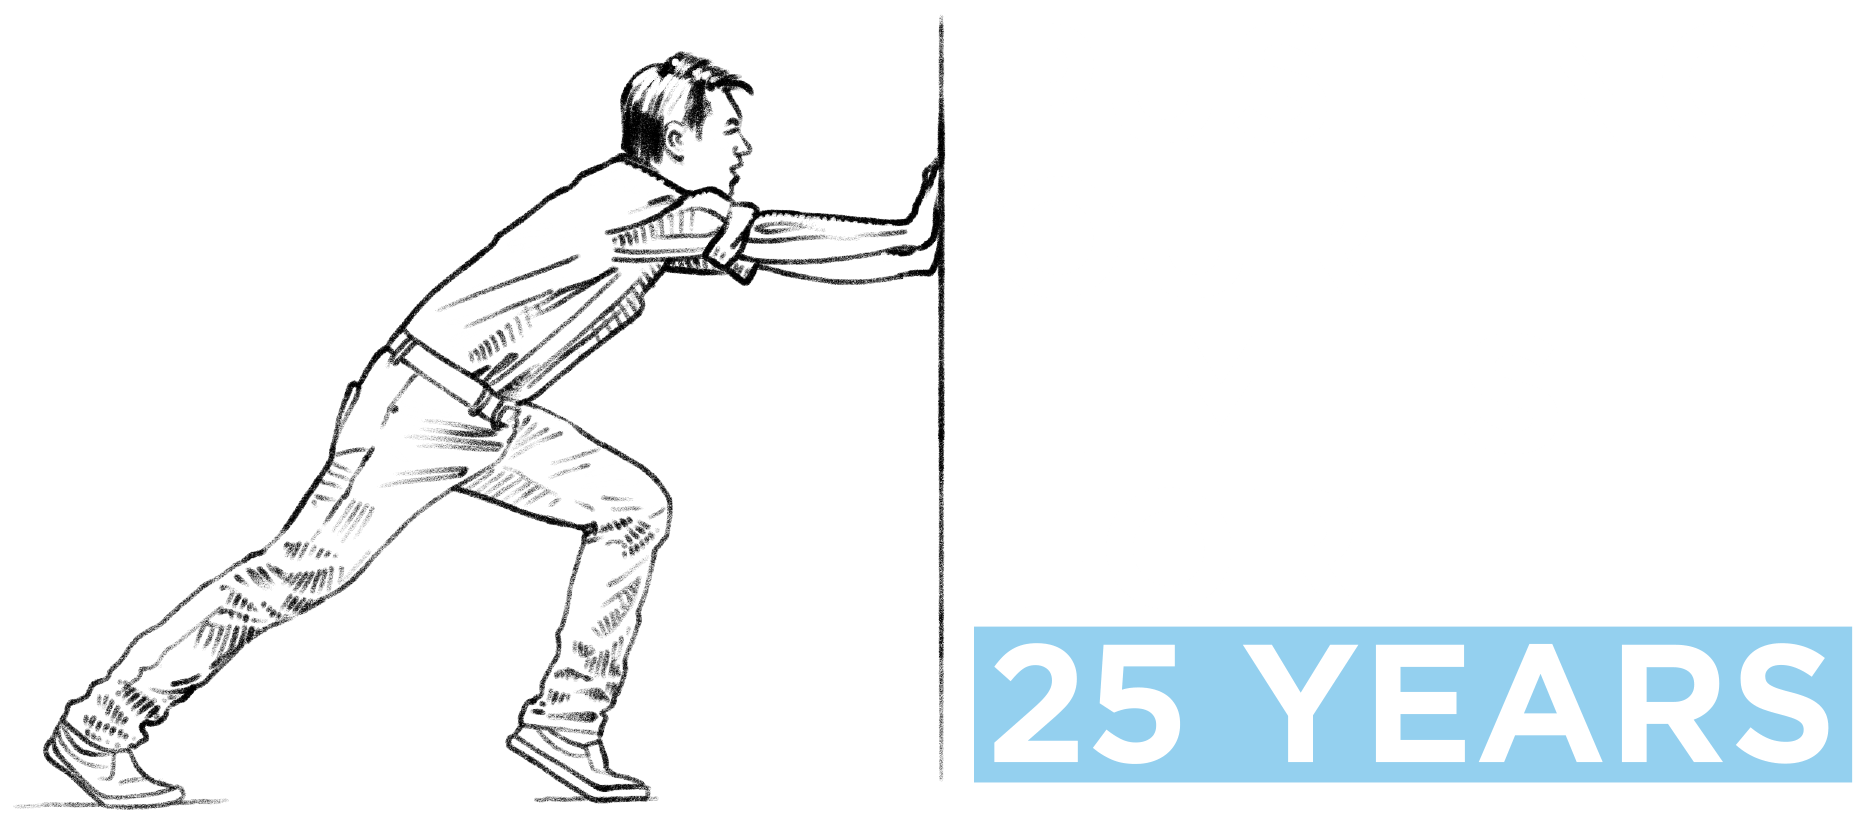 Pushing Our Limits for 25 Years